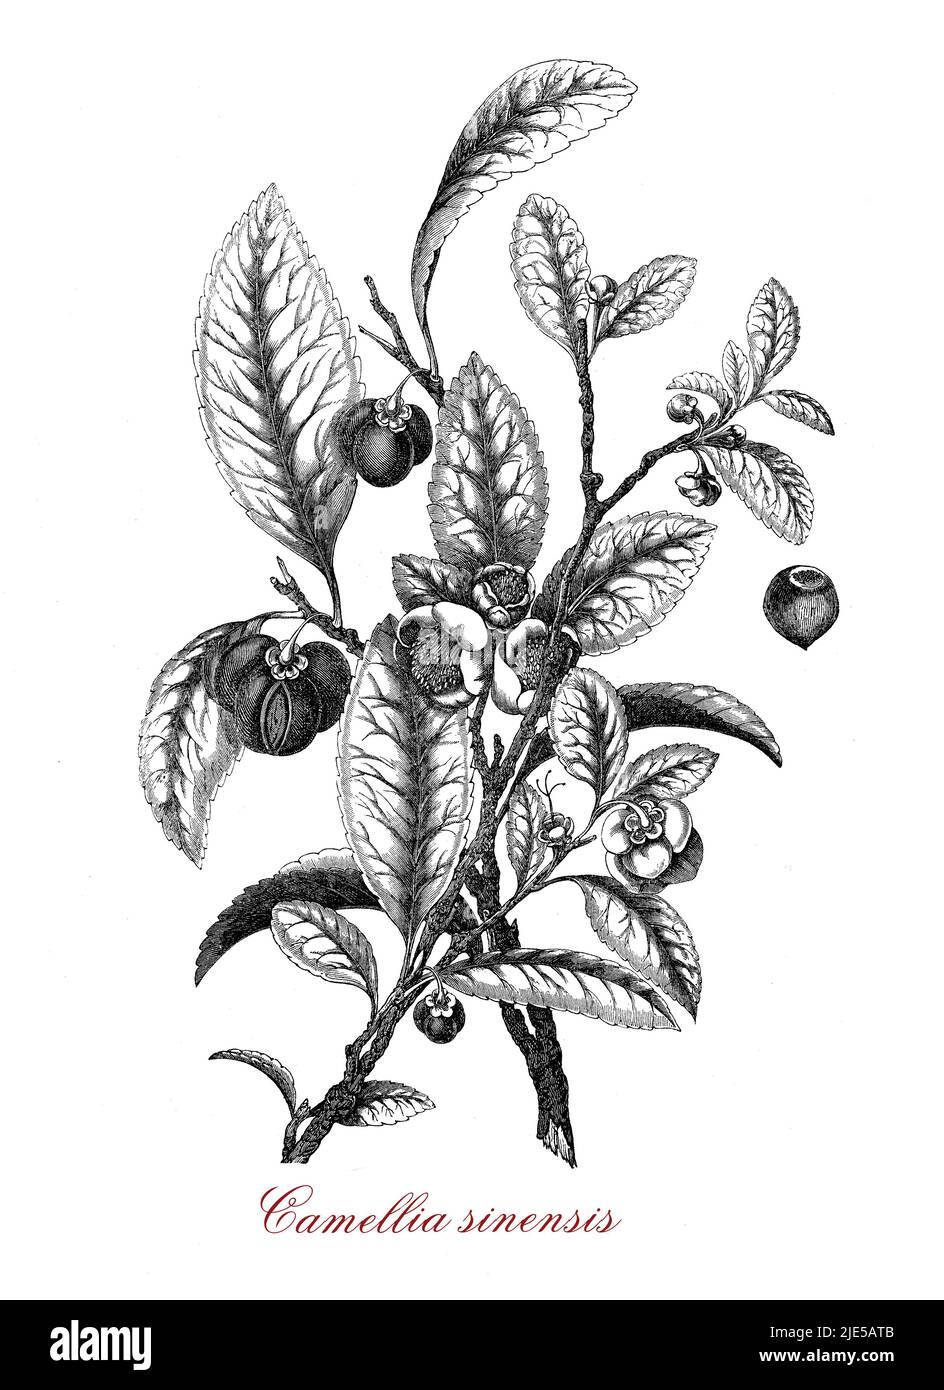 Vintage engraving of Camellia sinensis flowering plant botanical morphology:the leaves are used to produce tea. The plant originates from Asia and is cultivated in tropical and subtropical areas. The flowers are yellow-white with 7-8 petals, the seeds are pressed for tea oil for cooking. Stock Photo